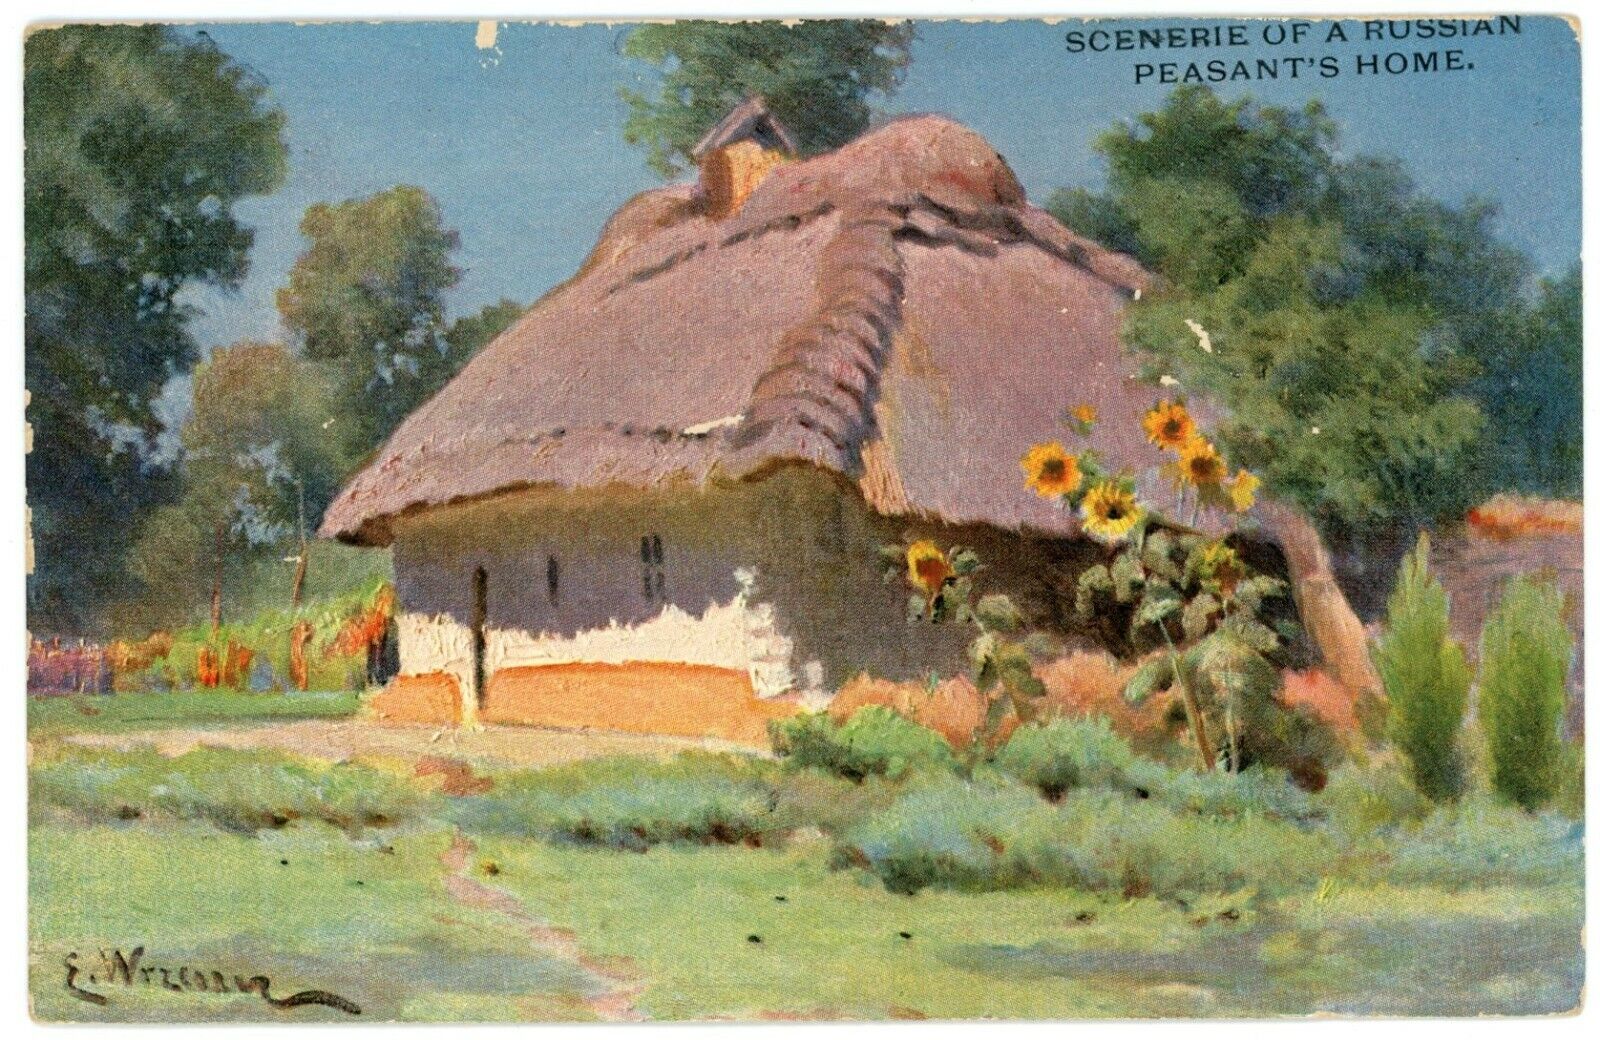 A Painting, A Humble Home Sunflowers Scenerie Of Russian Peasant\'s Home Postcard